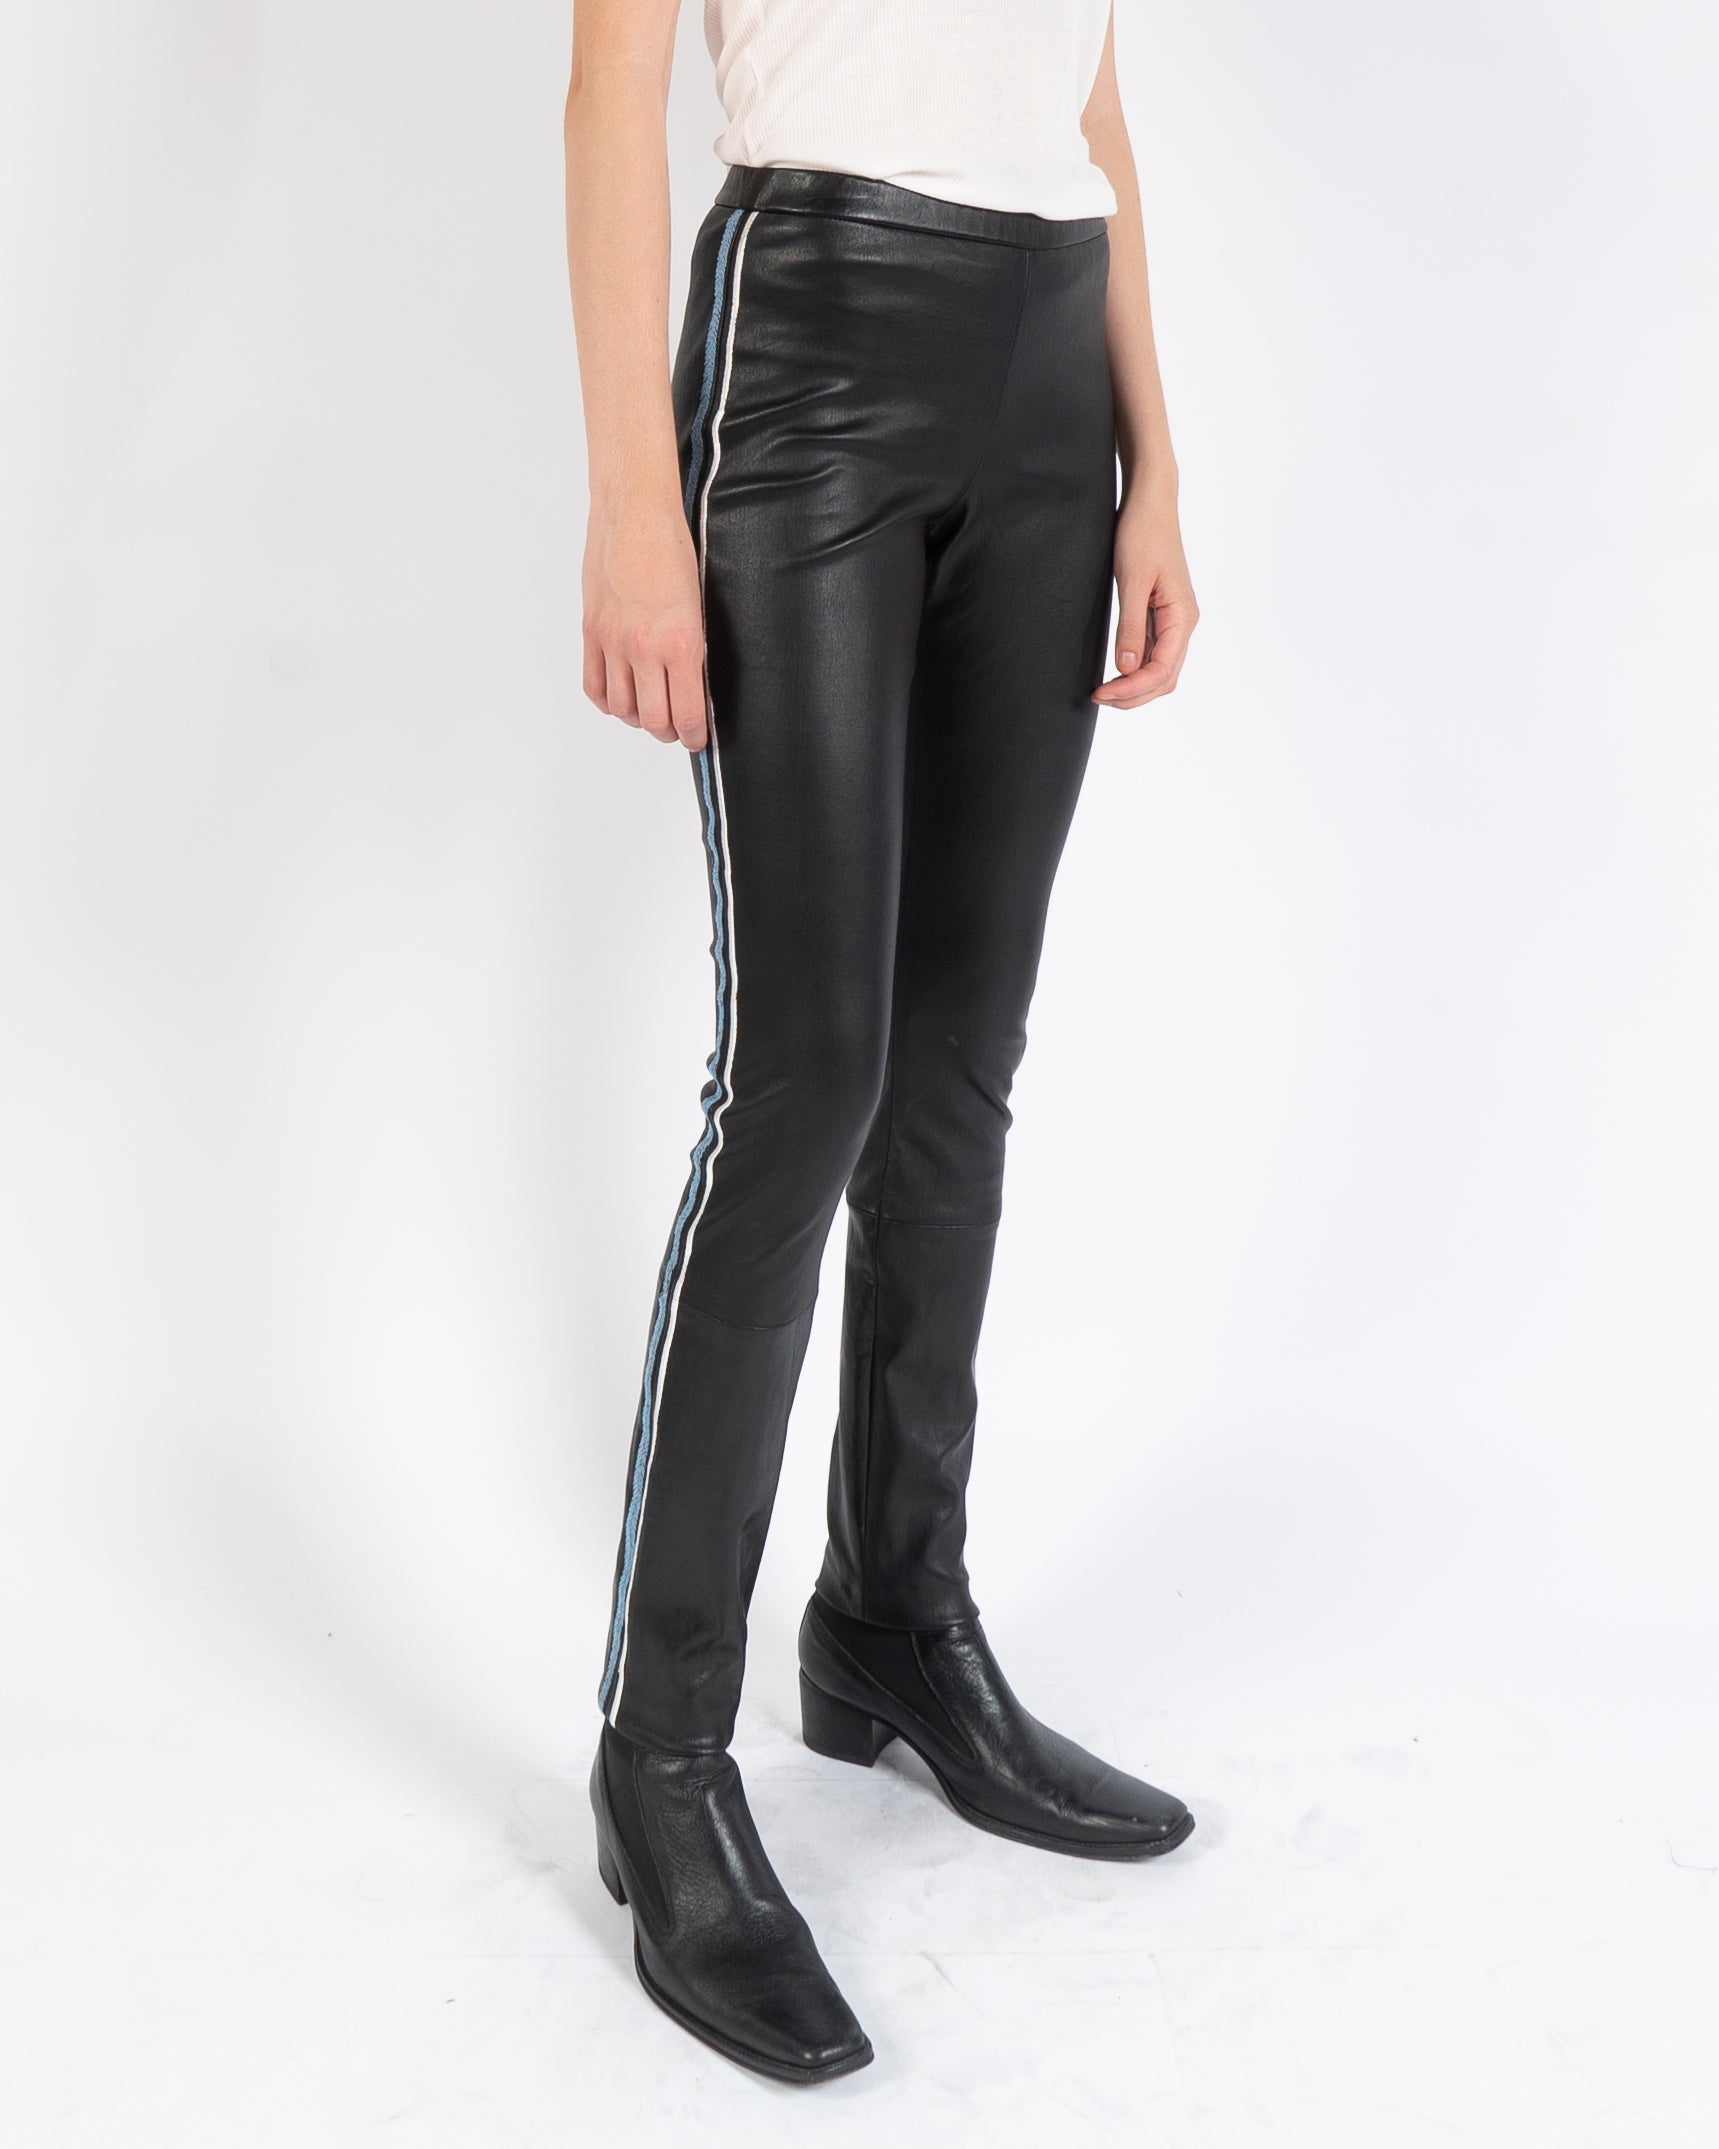 SS20 Embroidered Leather Leggings